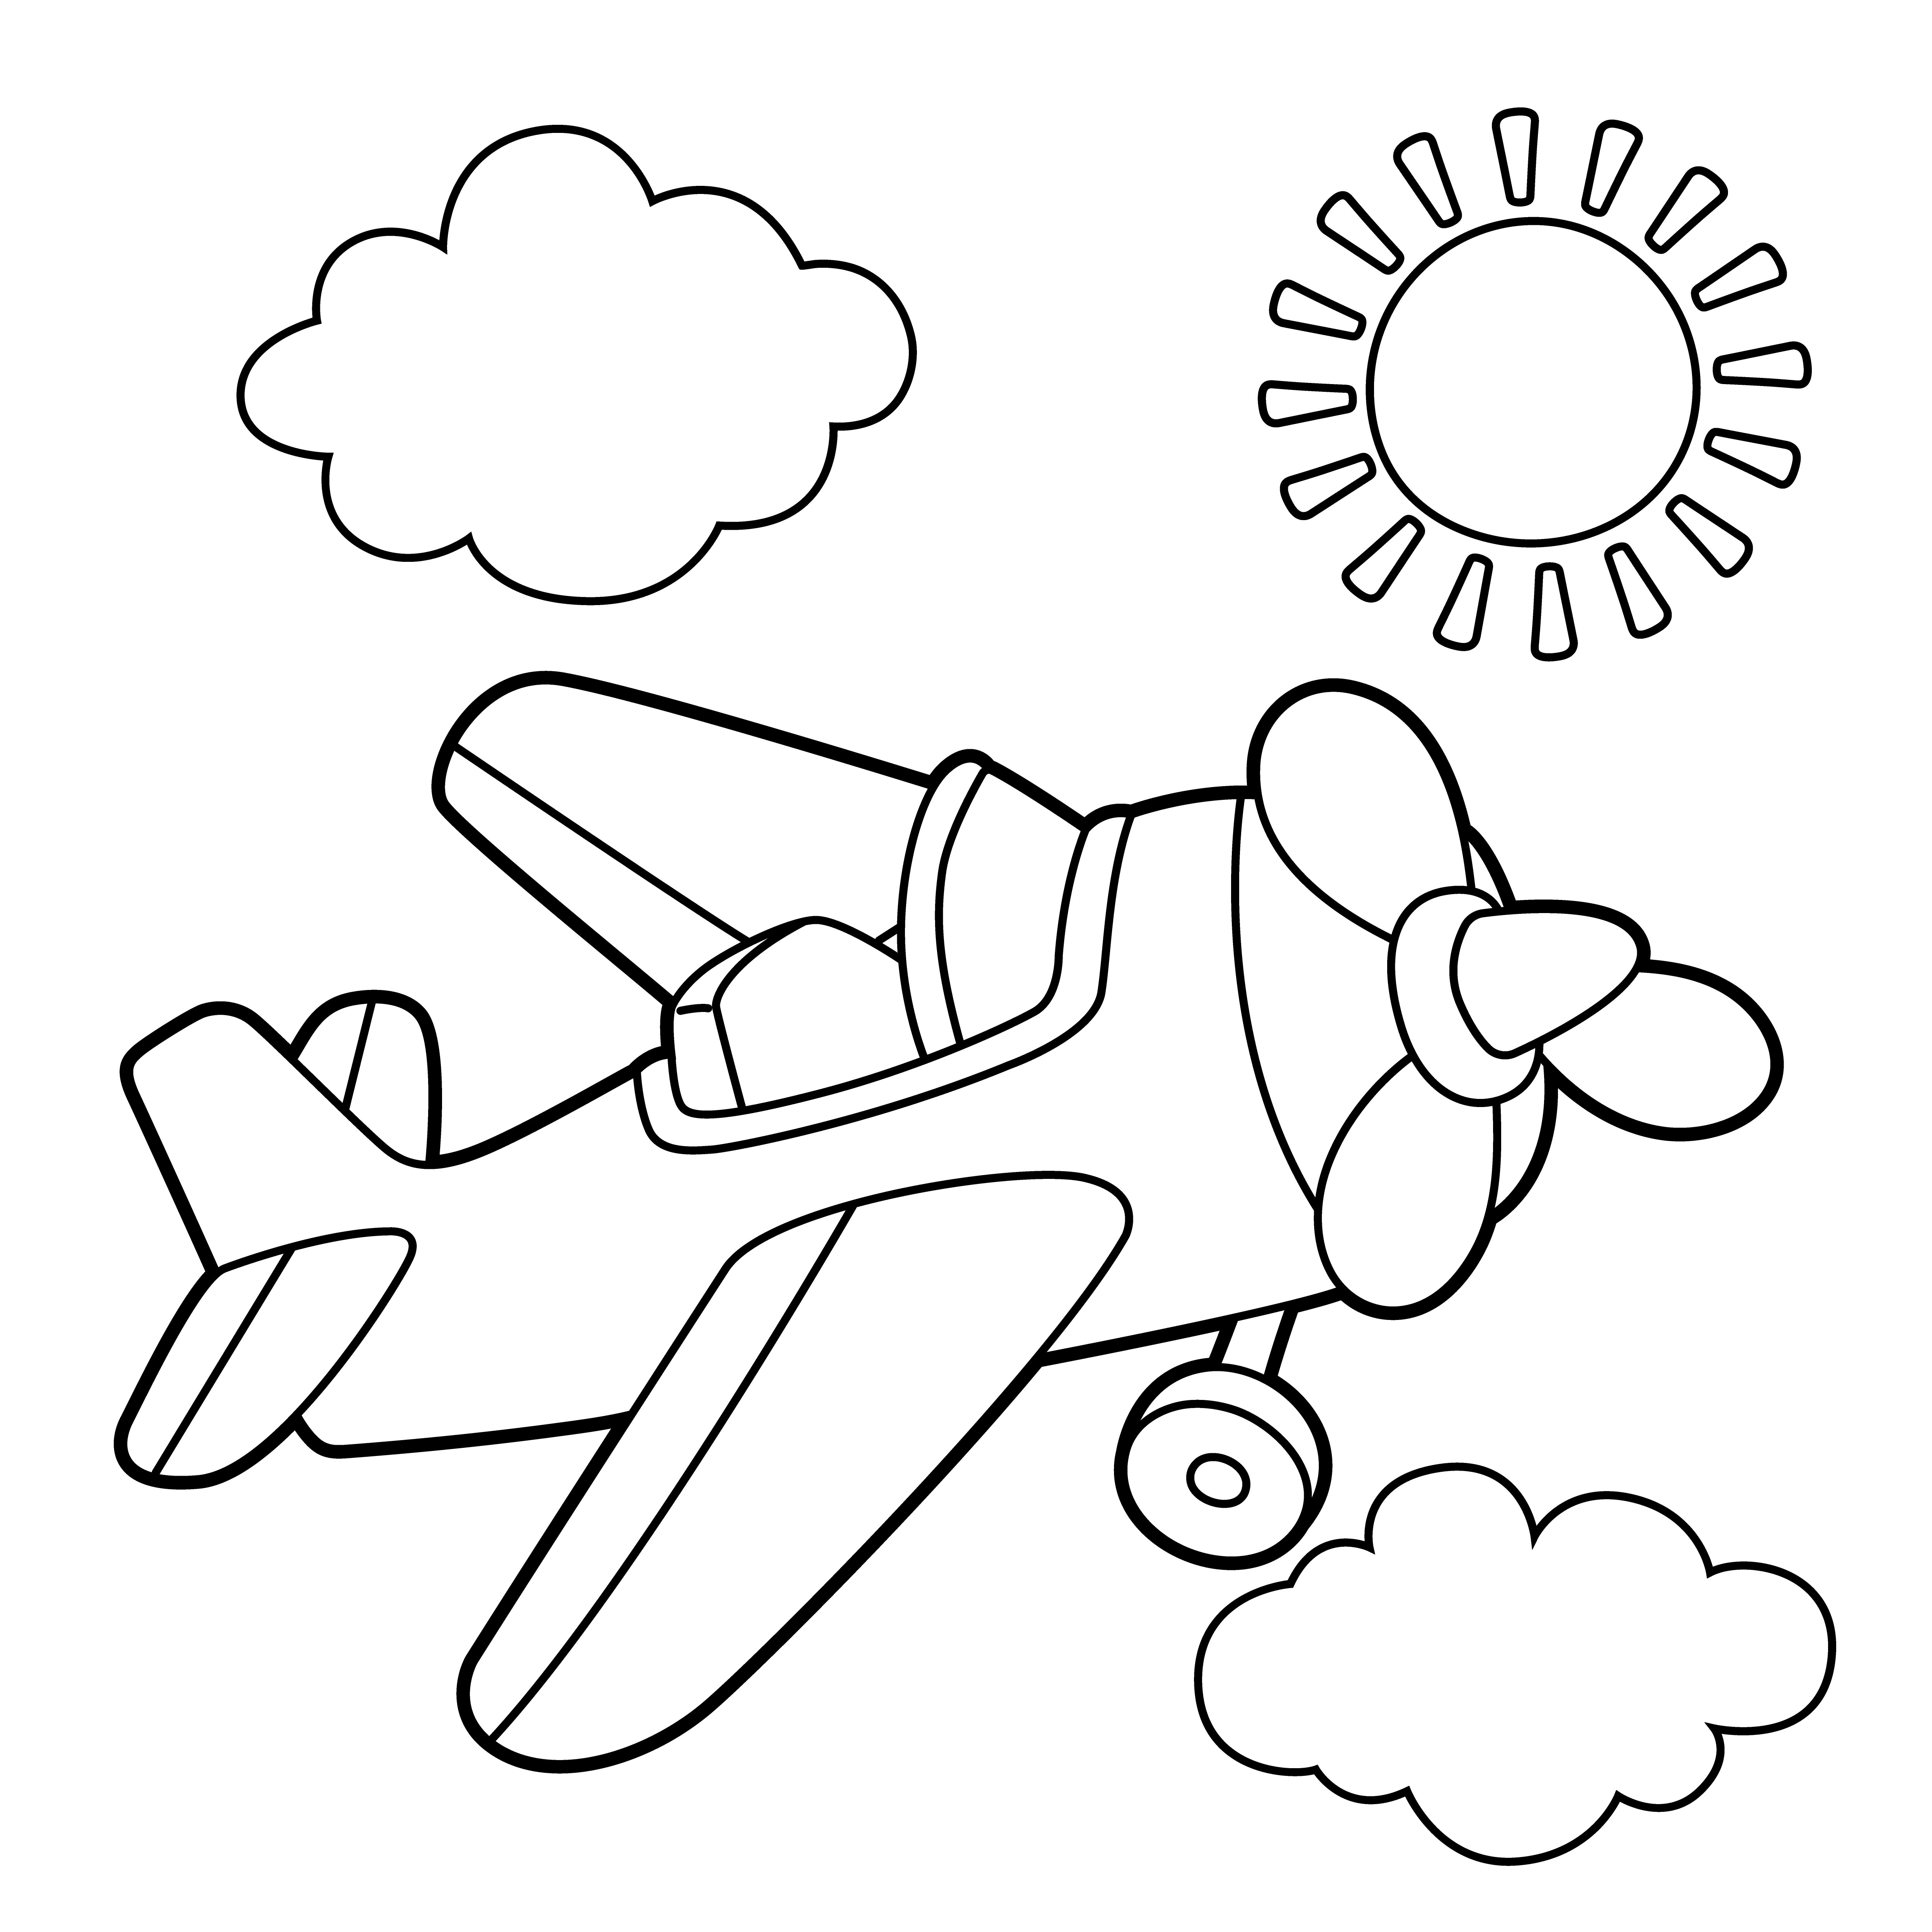 Propeller Plane Coloring Page 20 Vector Art at Vecteezy